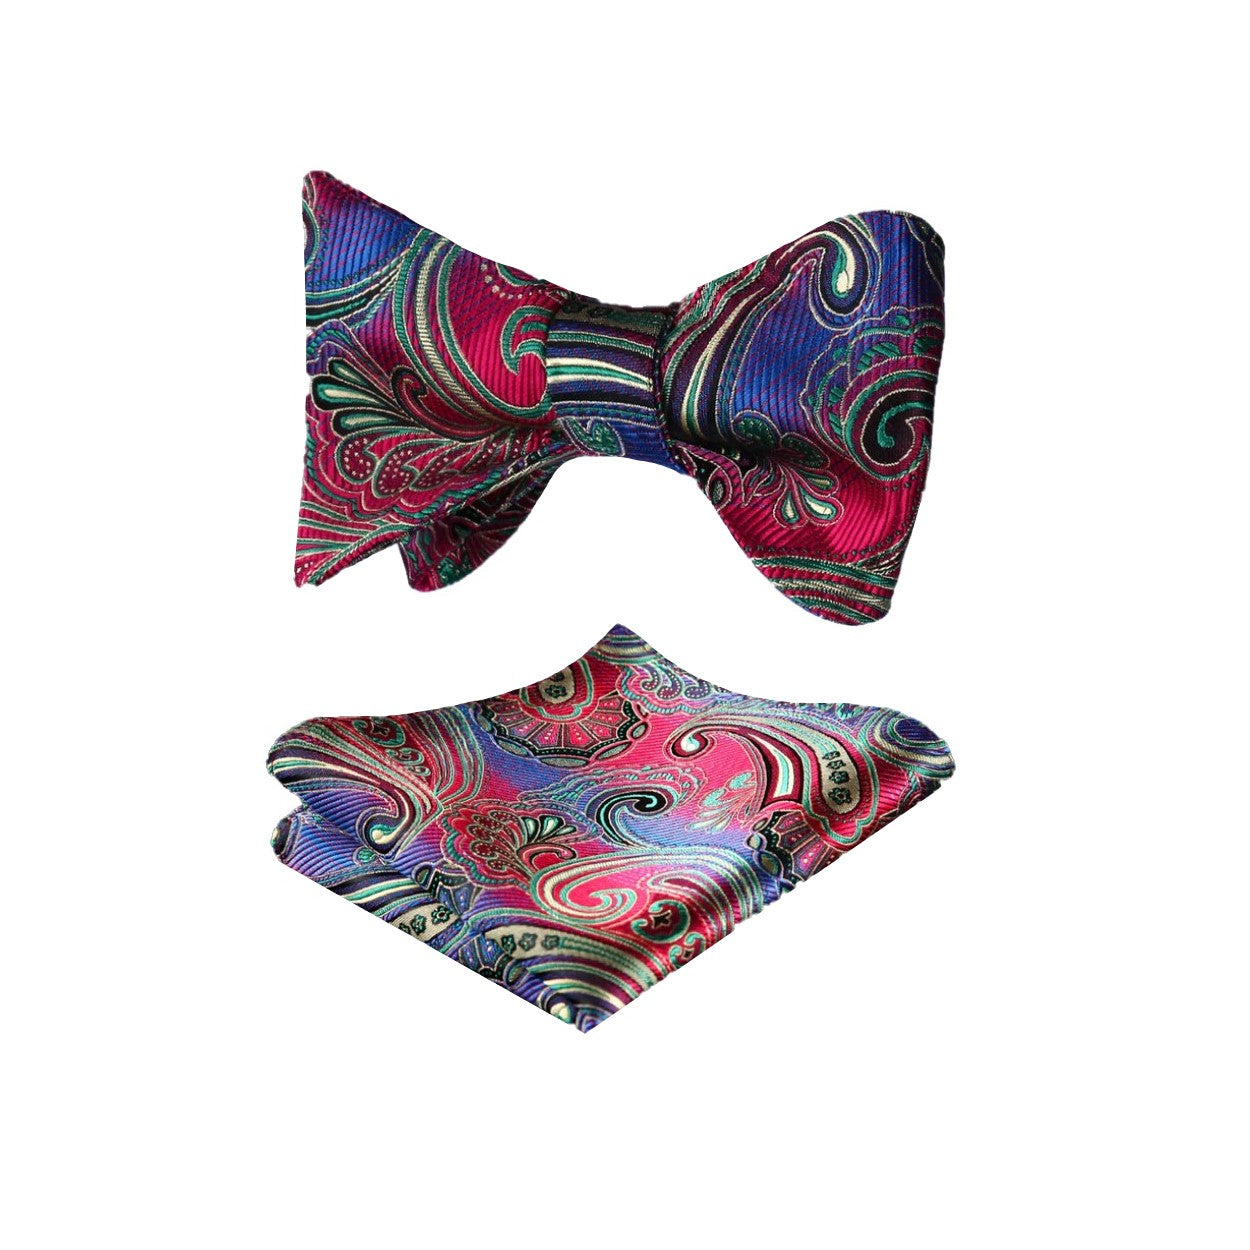 A Red, Green, Blue Paisley Pattern Silk Bow Tie, Matching Silk Pocket Square